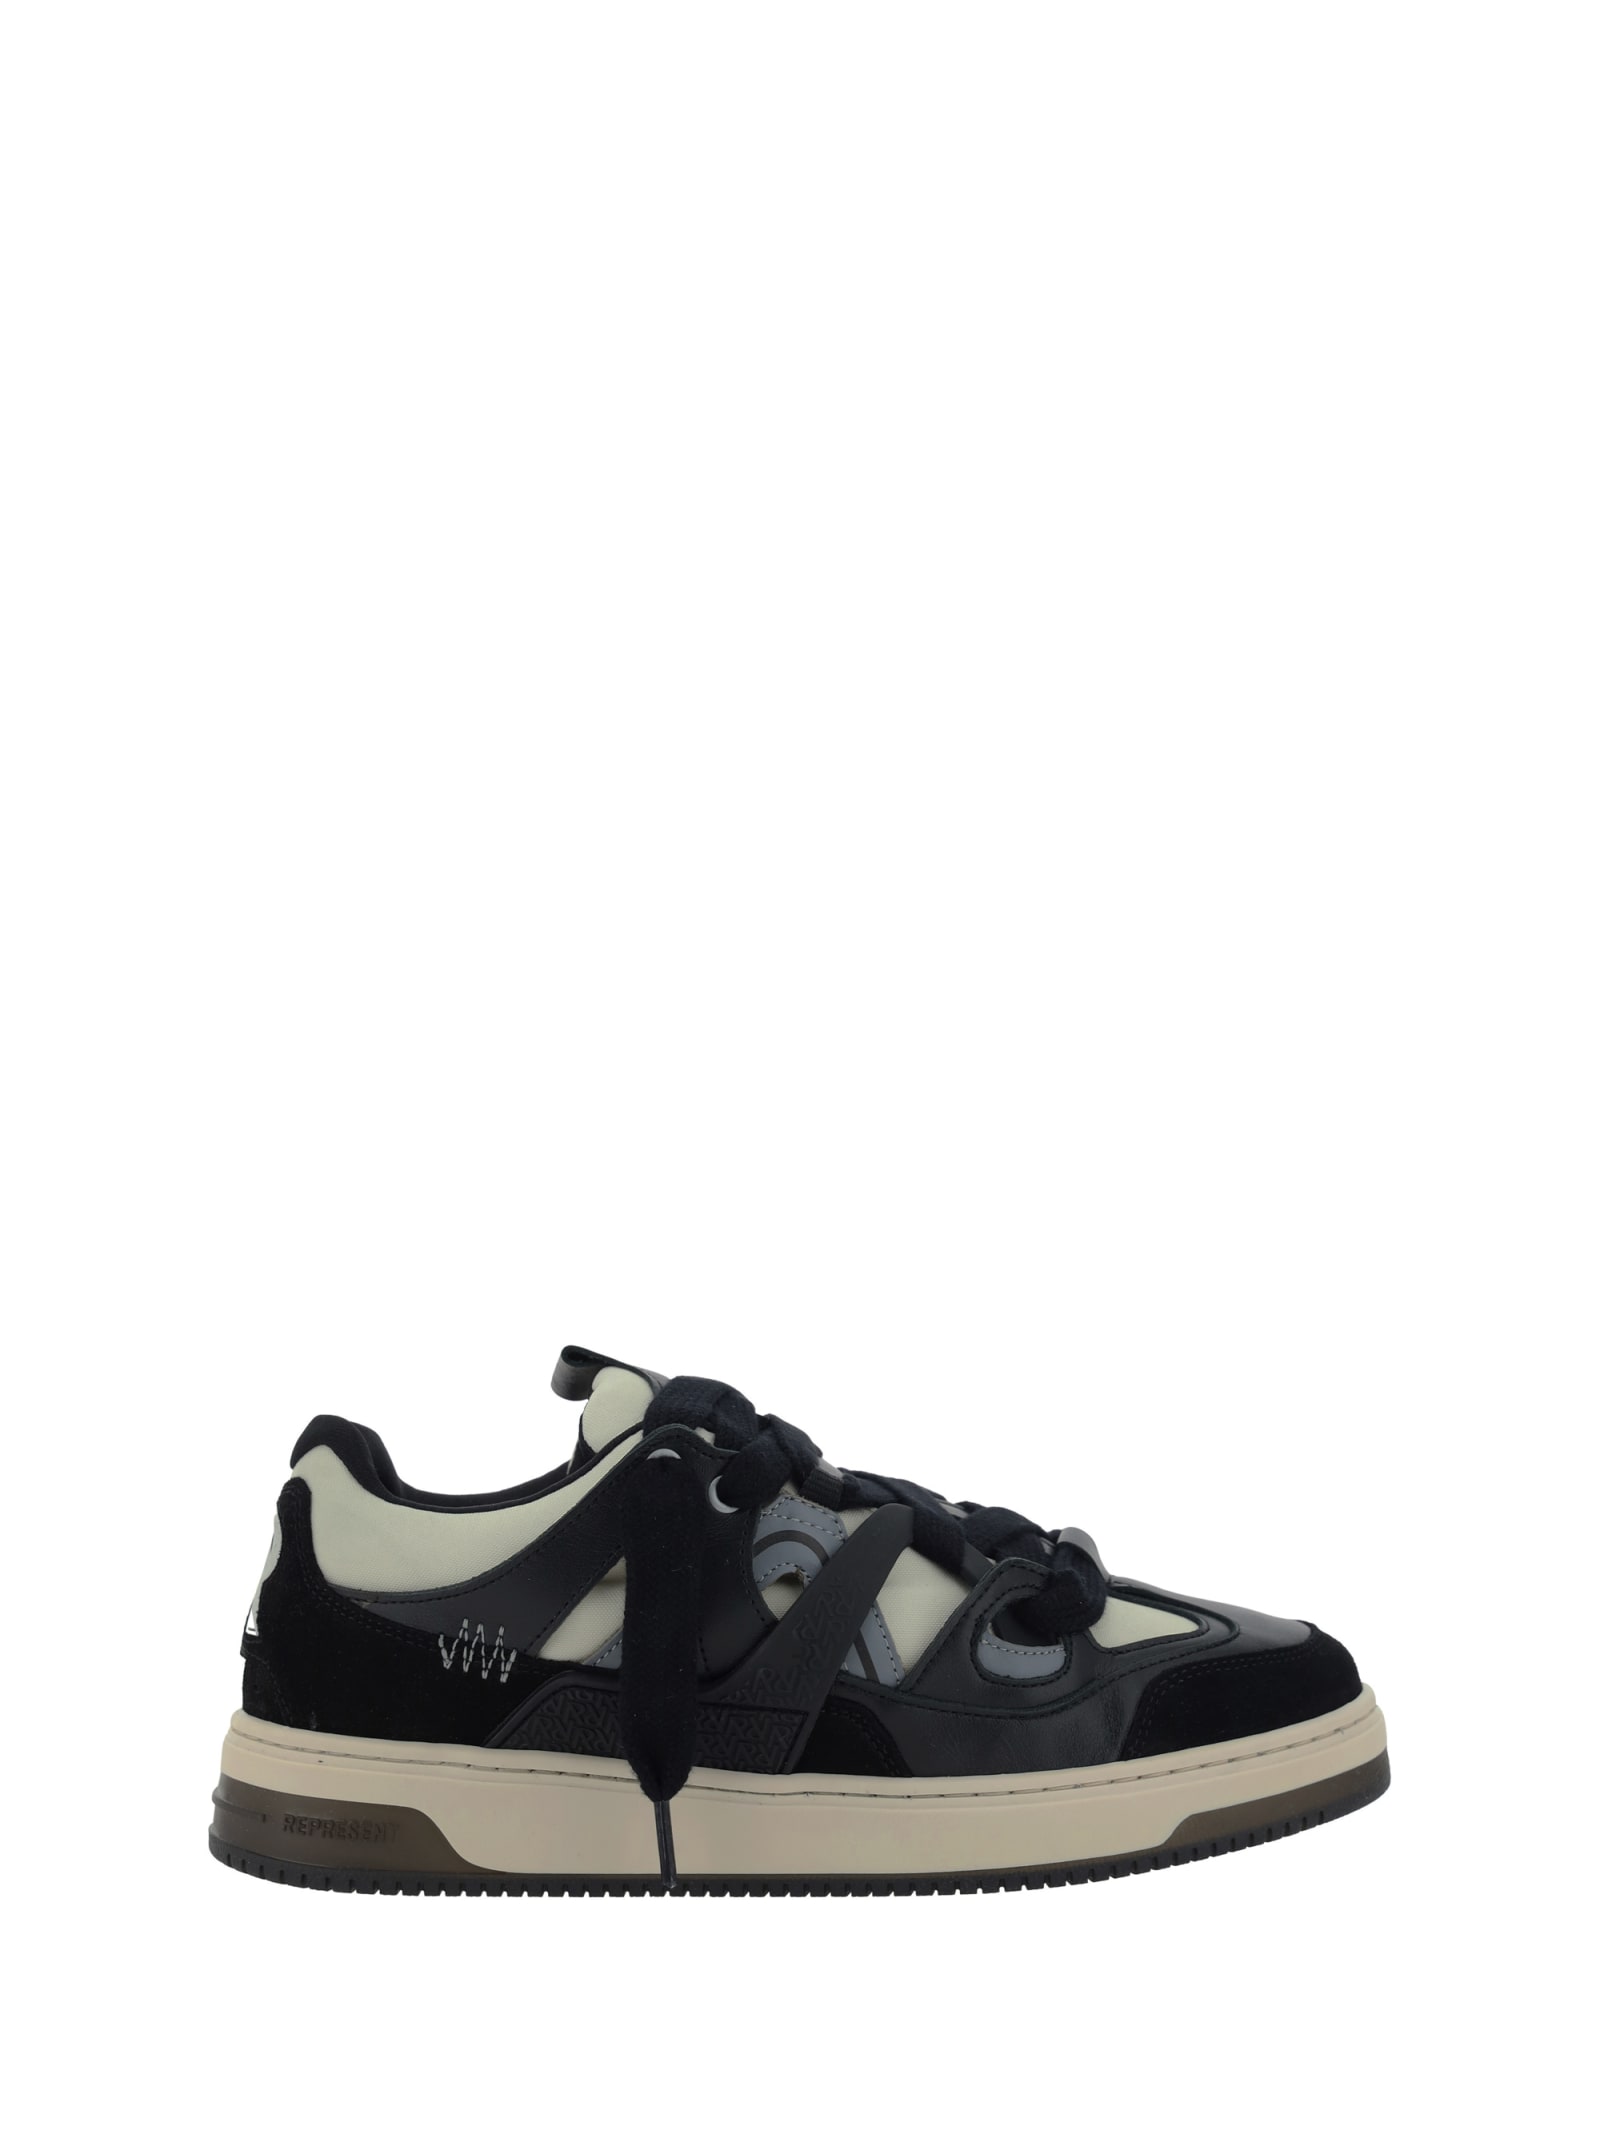 Shop Represent Bully Sneakers In Black/vintage White